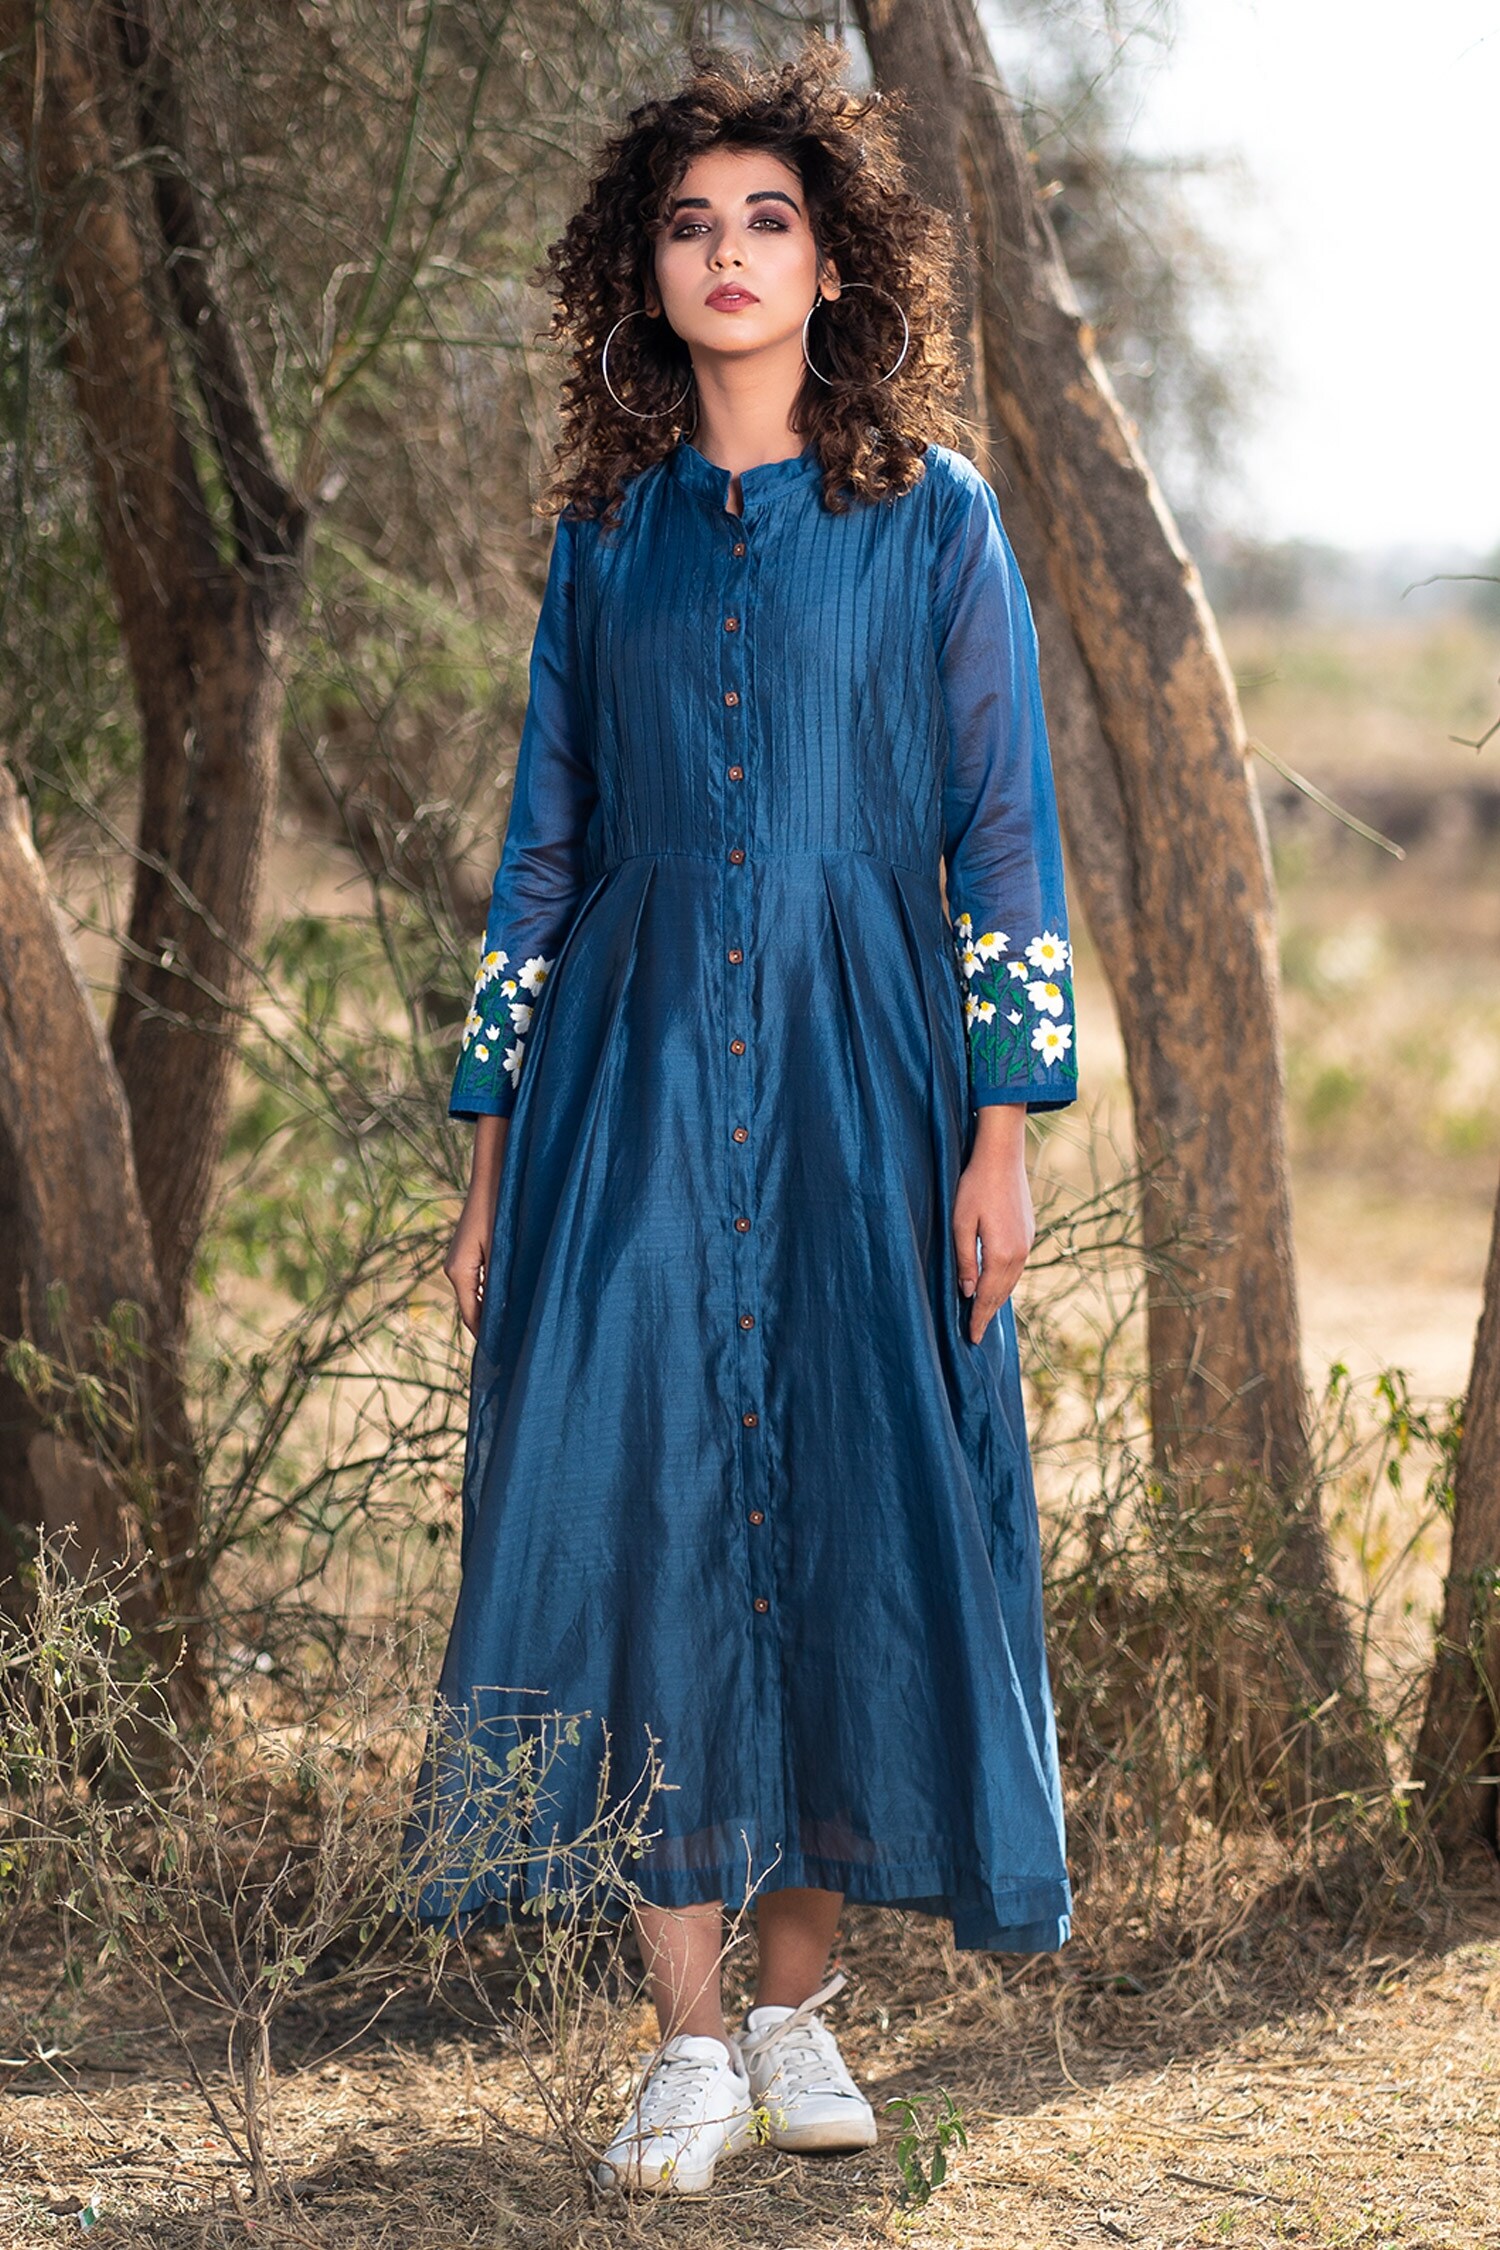 The Home Affair Blue Pintucked Chanderi Embroidered Dress